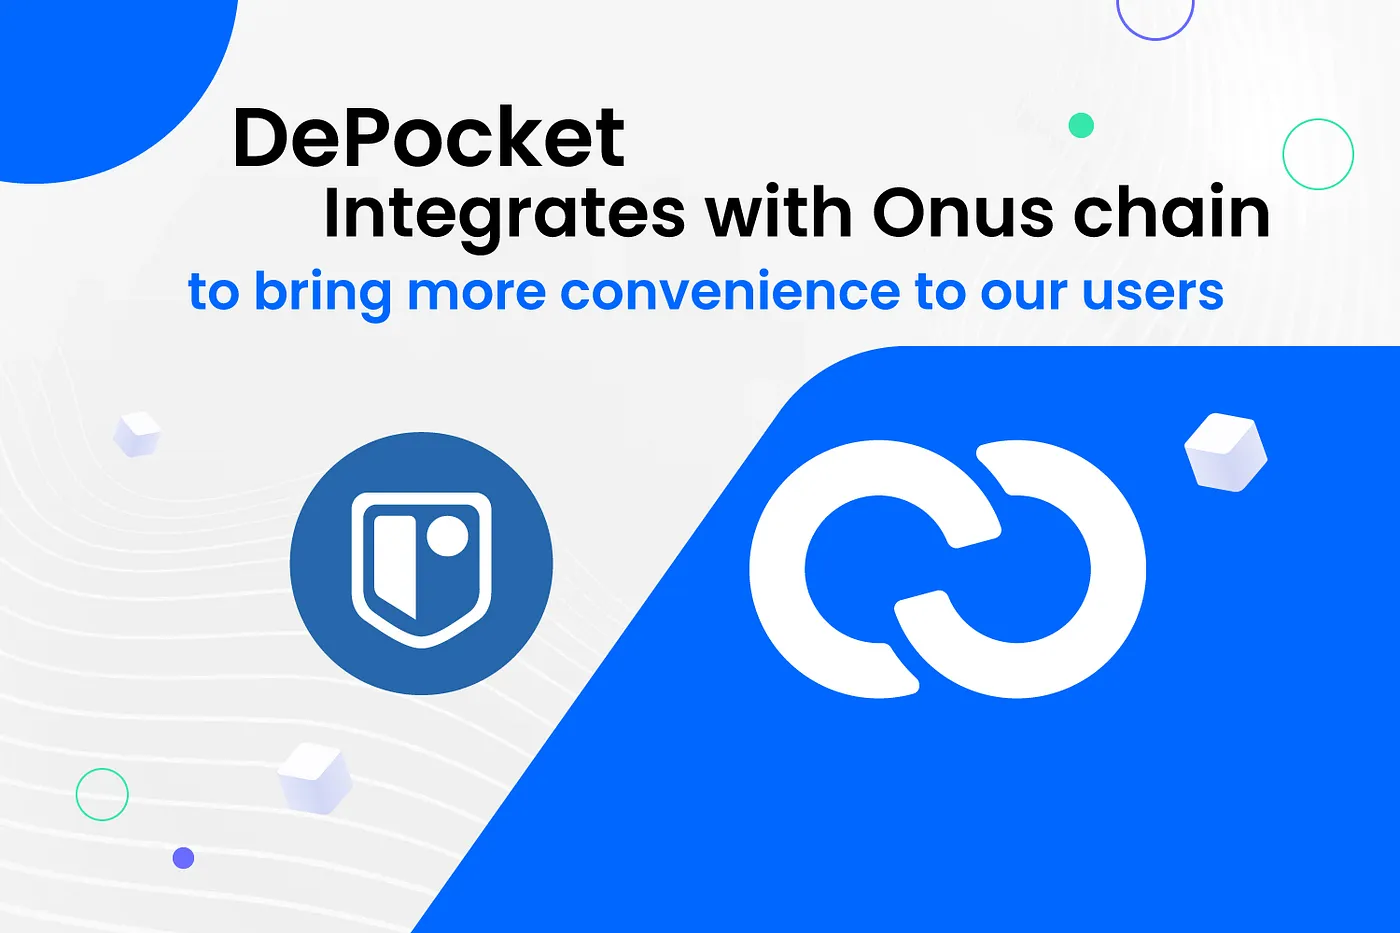 DePocket & Onus chain combine to increase user convenience